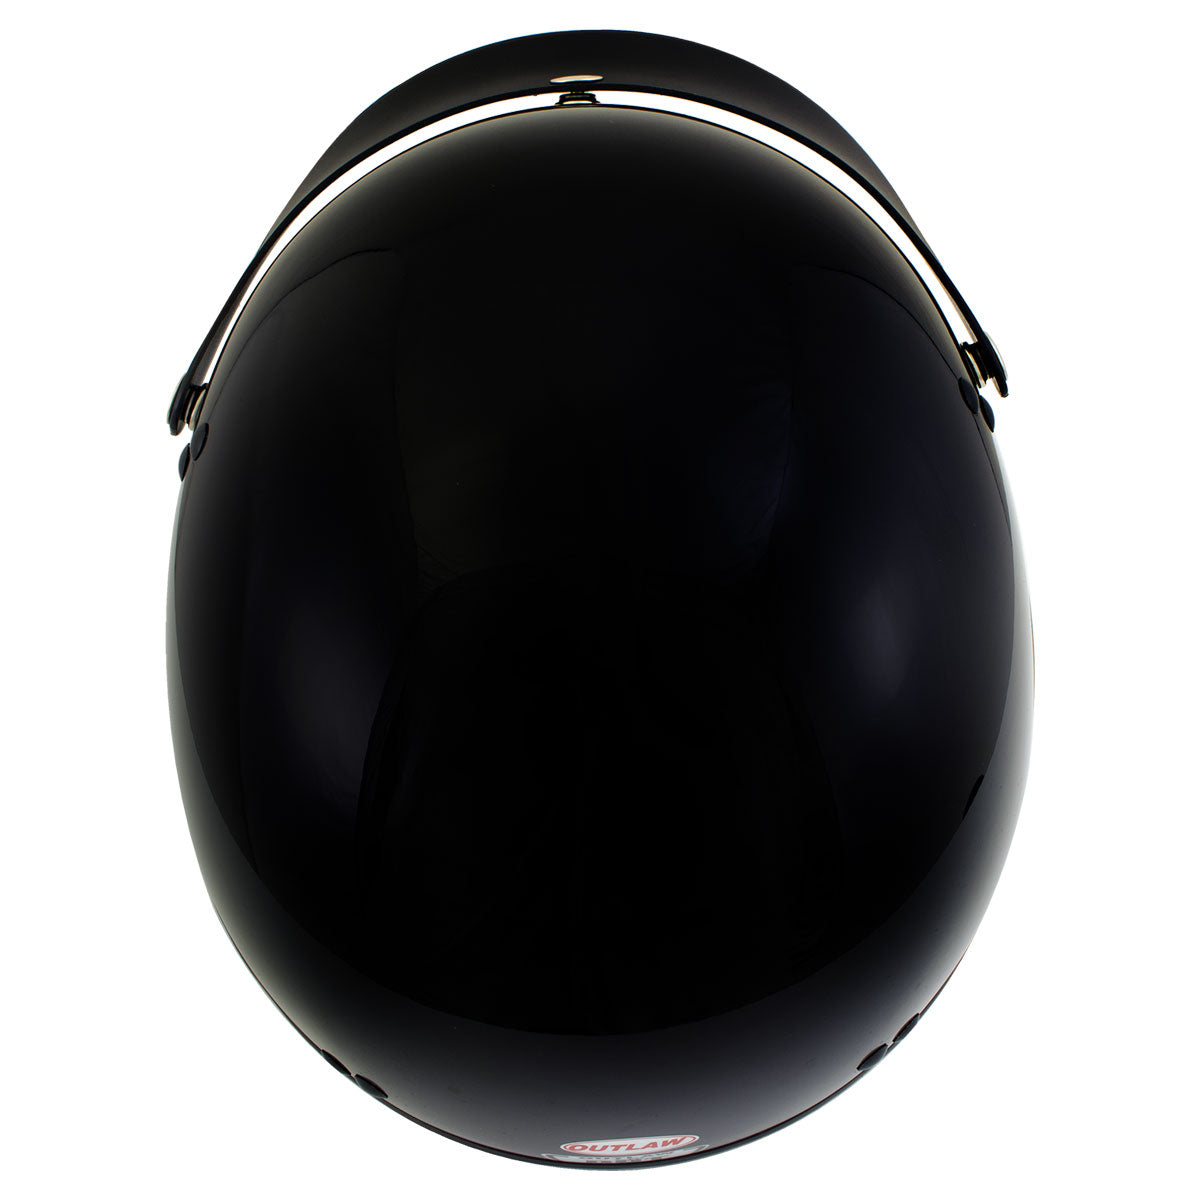 Outlaw T70 'Stealth' Advanced DOT Solid Gloss Black Half Motorcycle Helmet